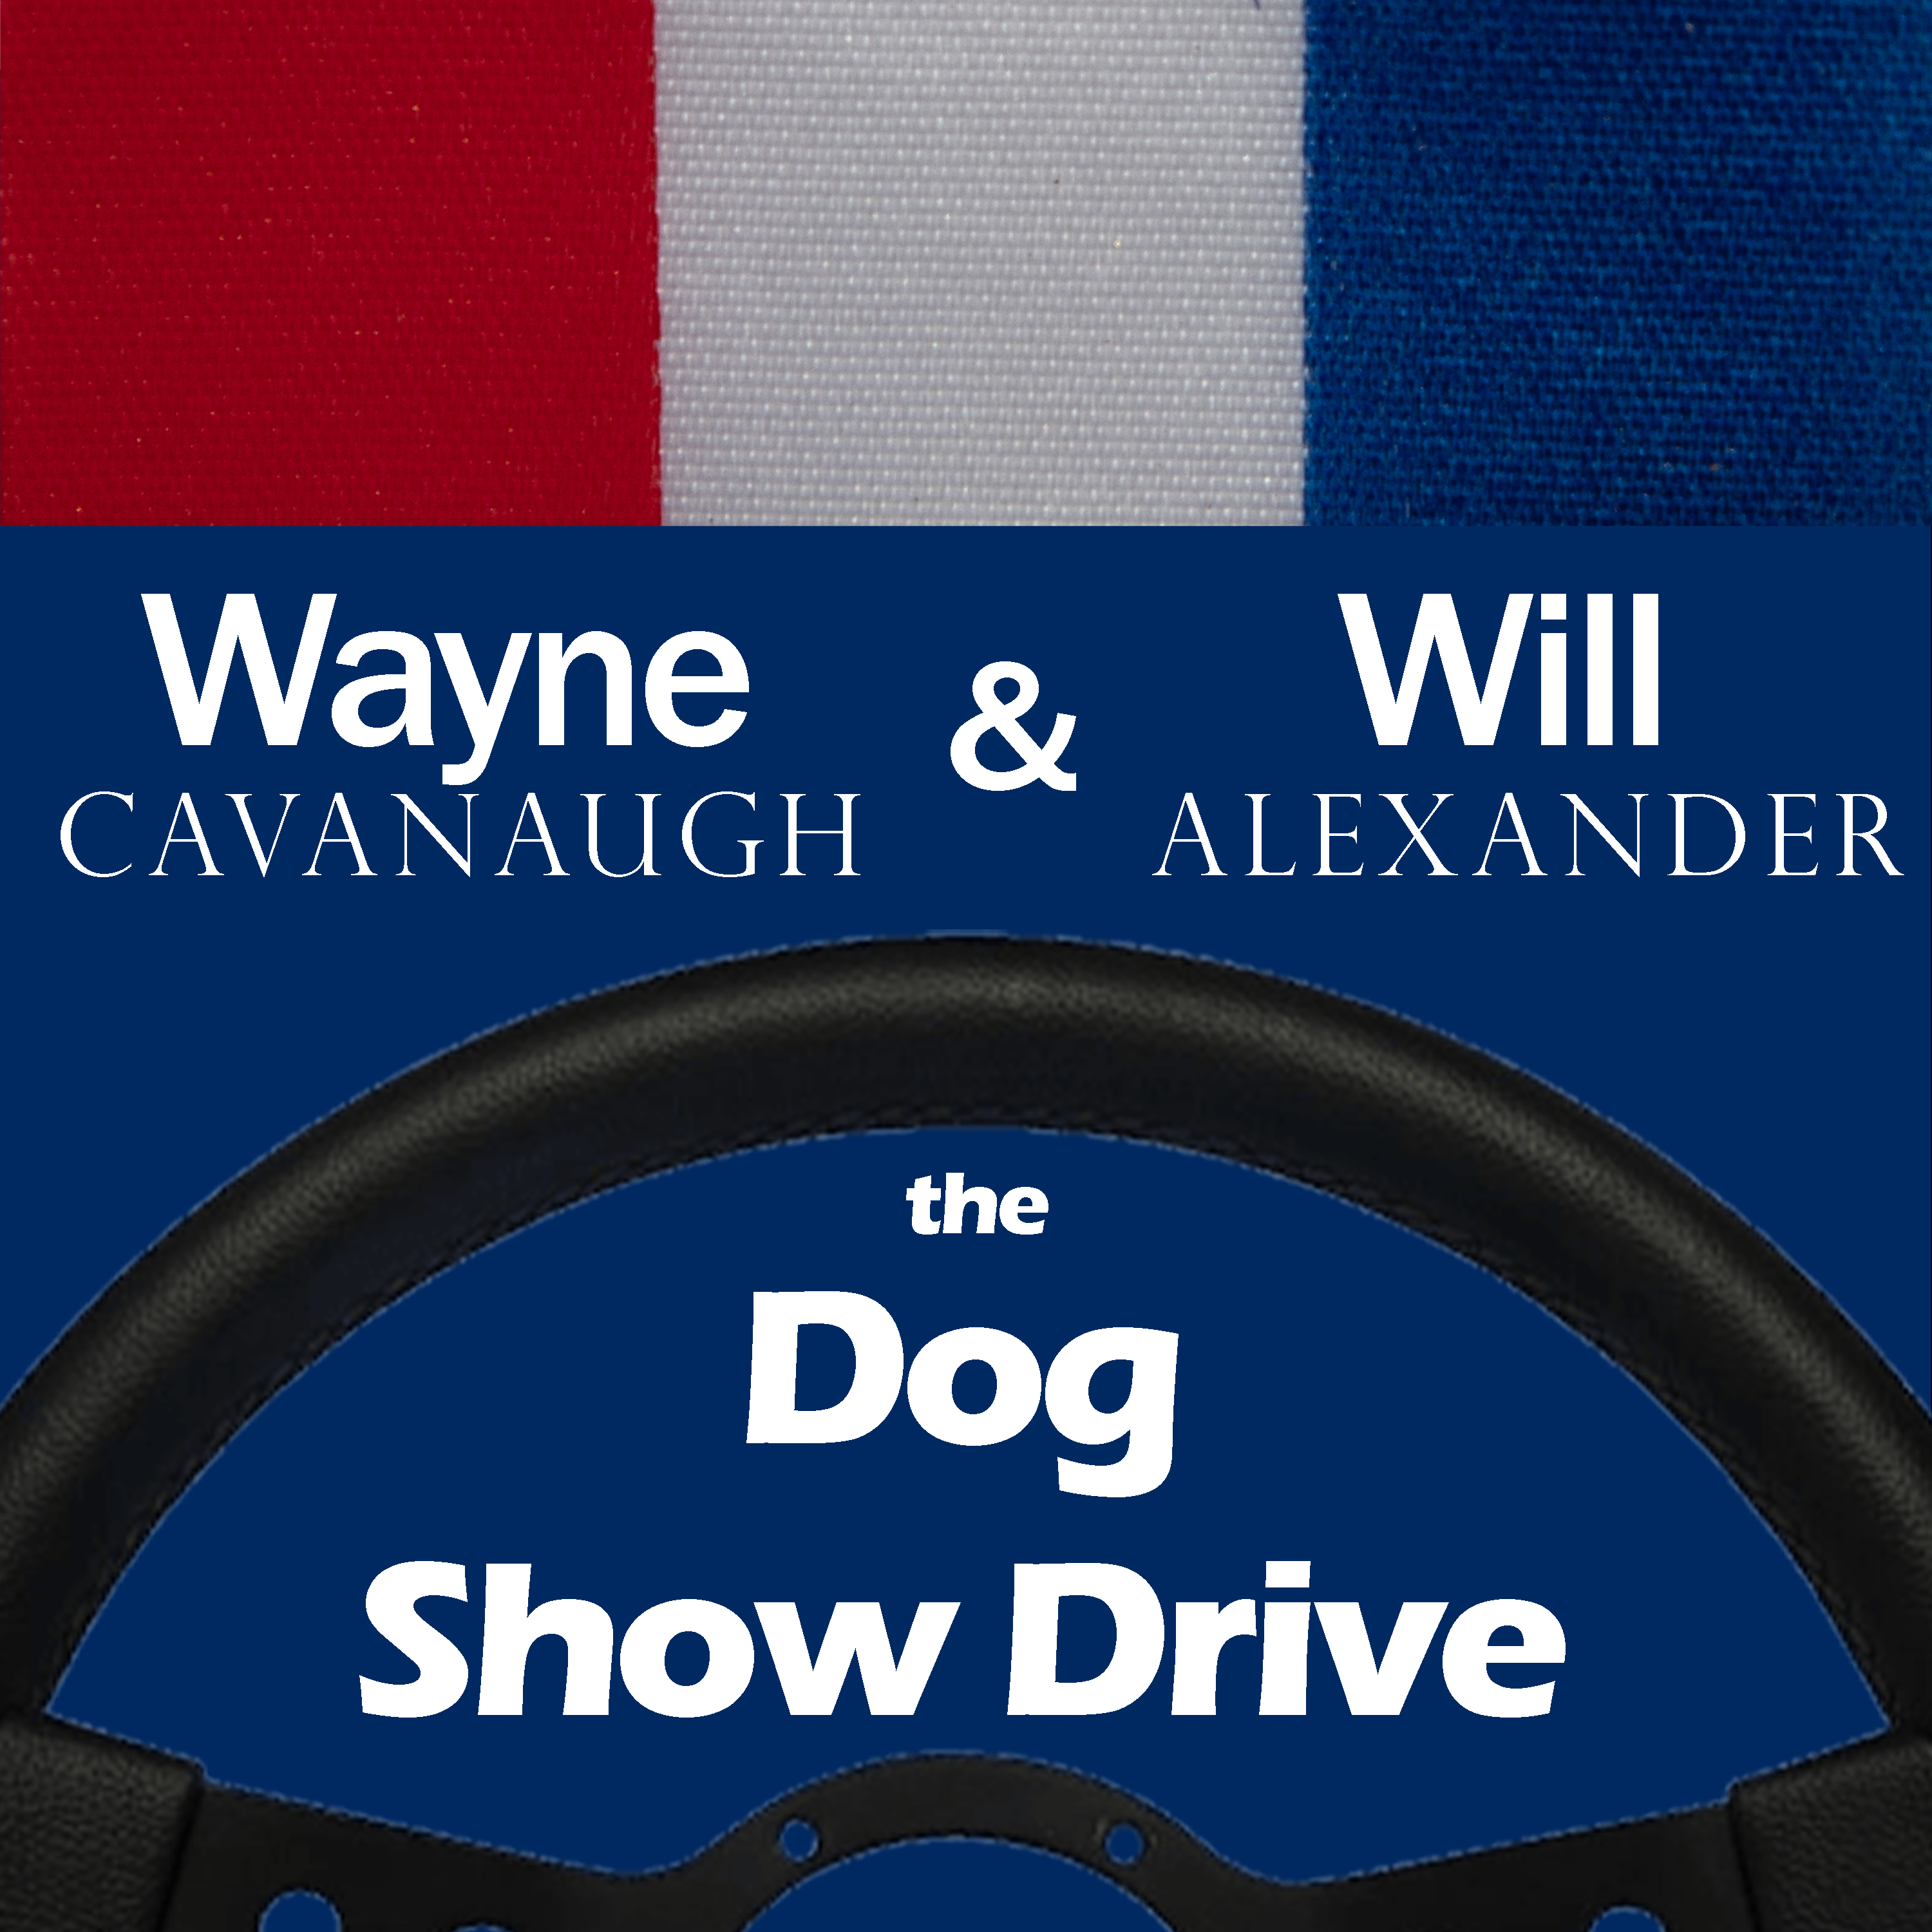 The Dog Show Drive - Episode 109 Replay 0f Episode 75 - Featuring Wayne Cavanaugh & Will Alexander